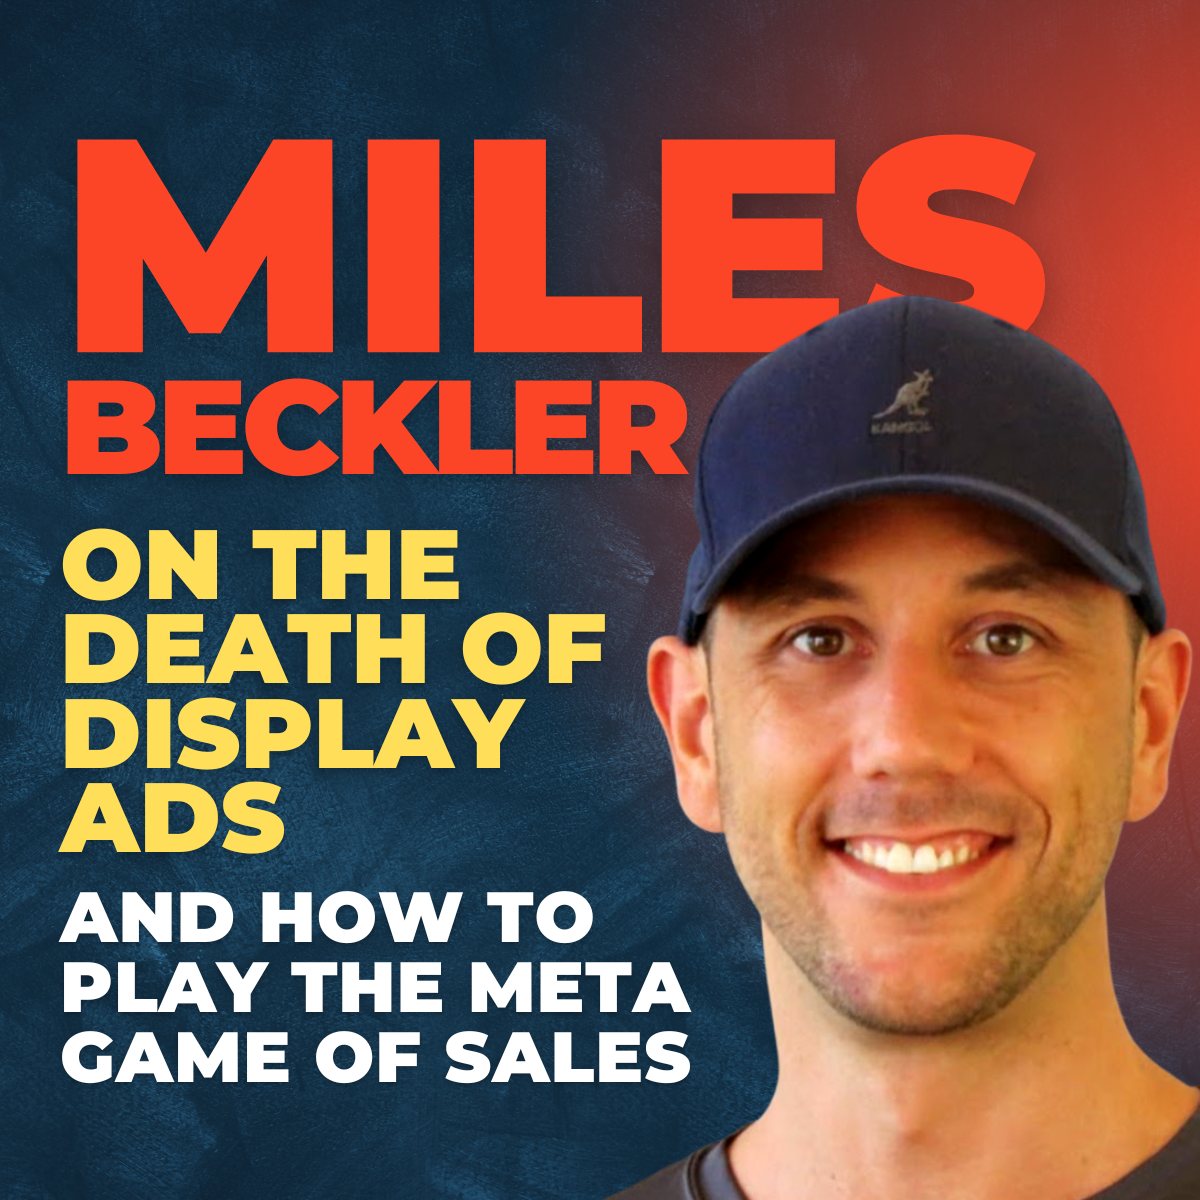 Miles Beckler on the death of display ads and how to play the meta game of sales